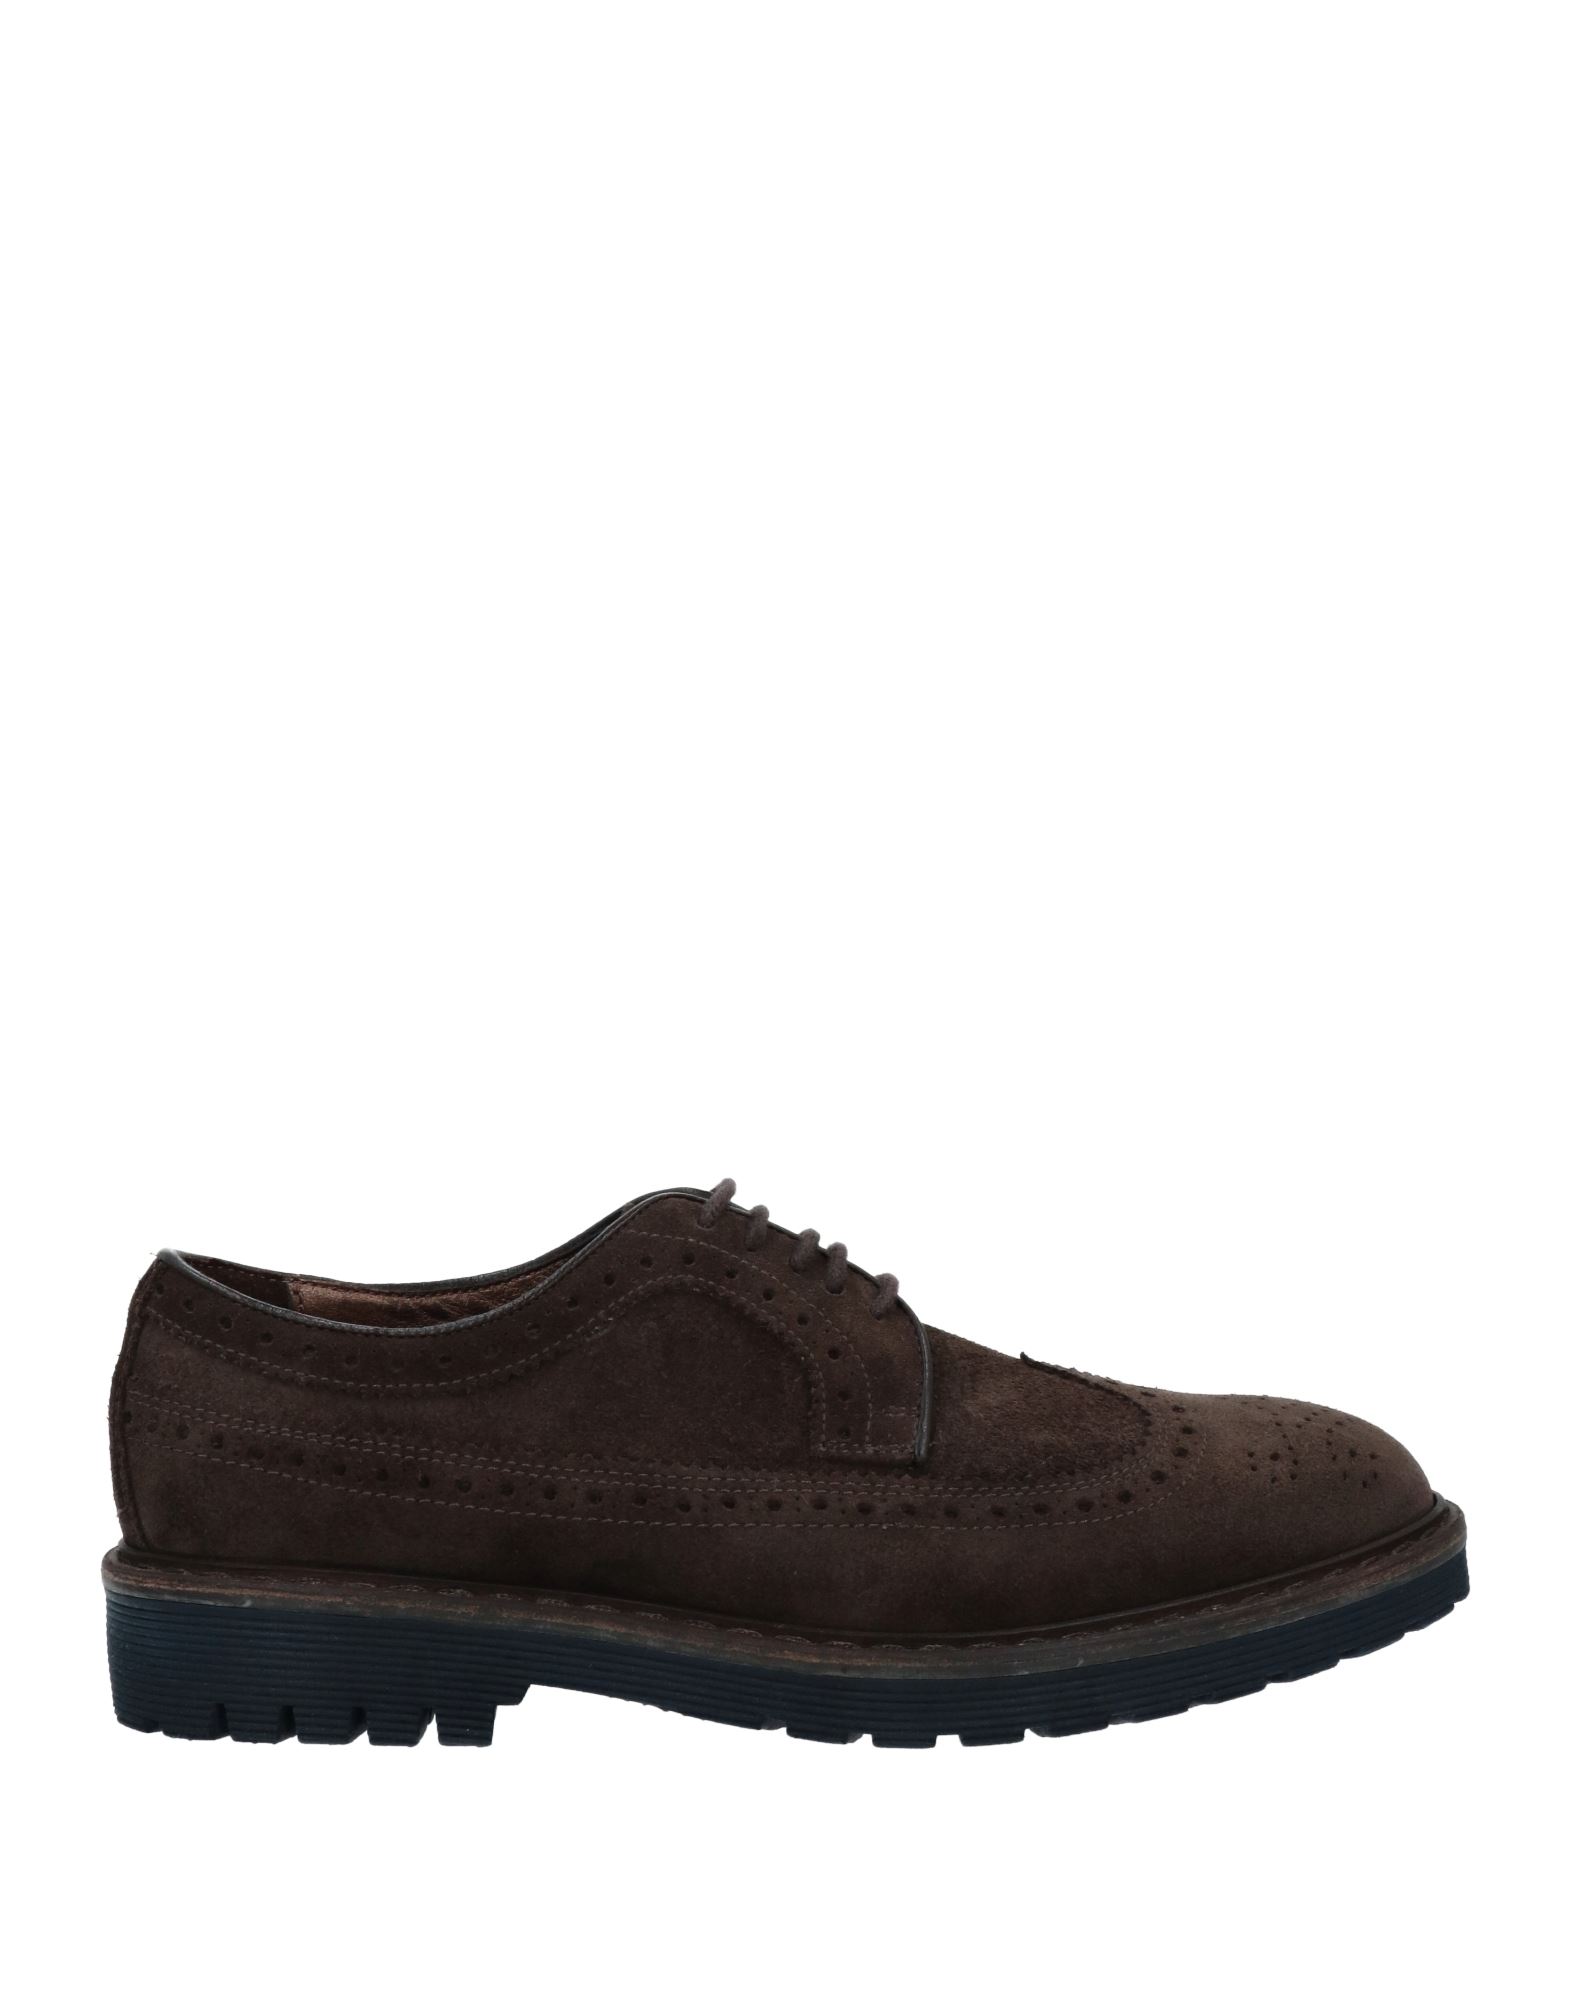 STONE HAVEN BY SOLDINI Shoes for Men | ModeSens